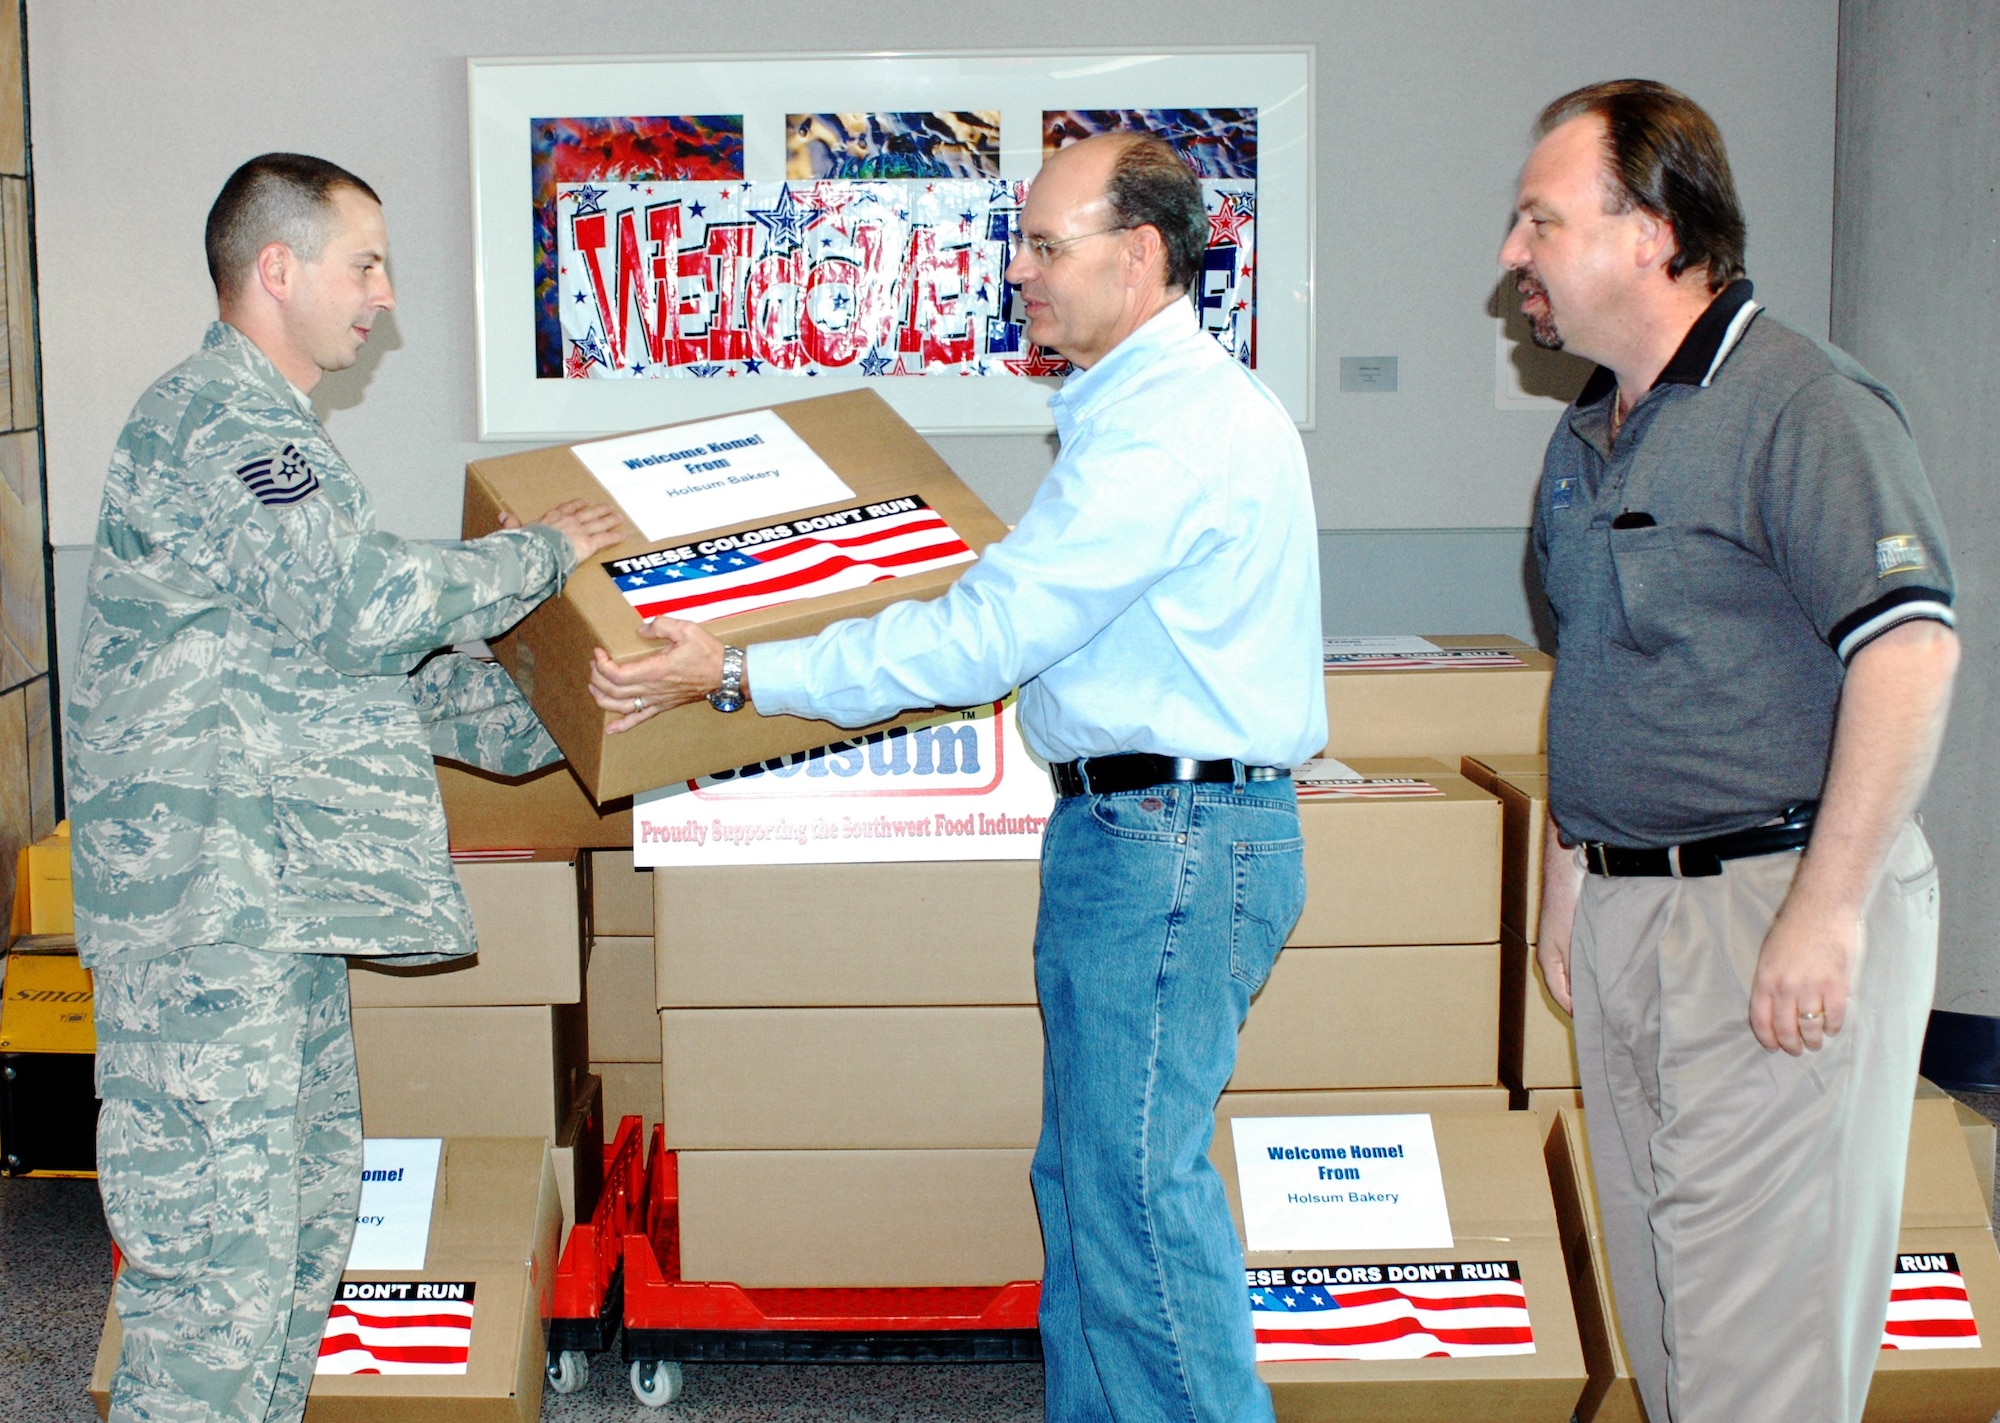 Tech. Sgt. Joe Mazzei accepts a box of bread from Sam Dodson (center) and Rick 
Cortese of Holsom Bakery Inc Jan 24 at Tucson International Airport upon his 
return from Balad Air Base, Iraq. The 162nd Fighter Wing of the Arizona Air 
National Guard welcomed home Mazzei and 27 other aircraft maintainers and 
pilots after supporting F-16 operations in country. The Arizona baking company 
gave each returning member a box in appreciation of their service. (Air 
National Guard photo by Capt. Gabe Johnson)
